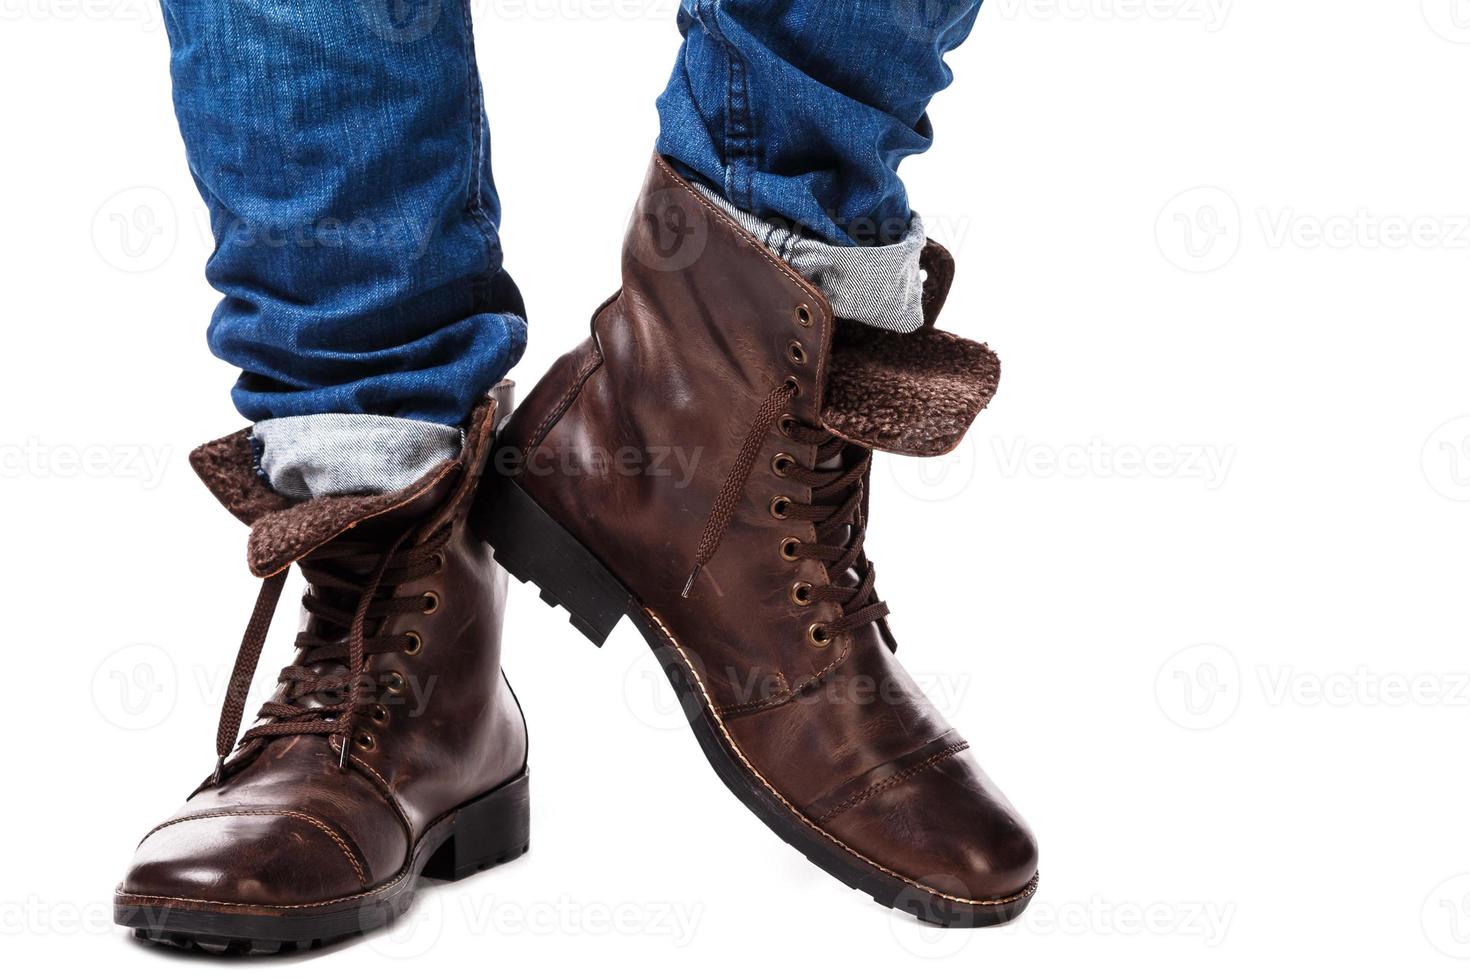 Male legs in jeans and leather boots photo